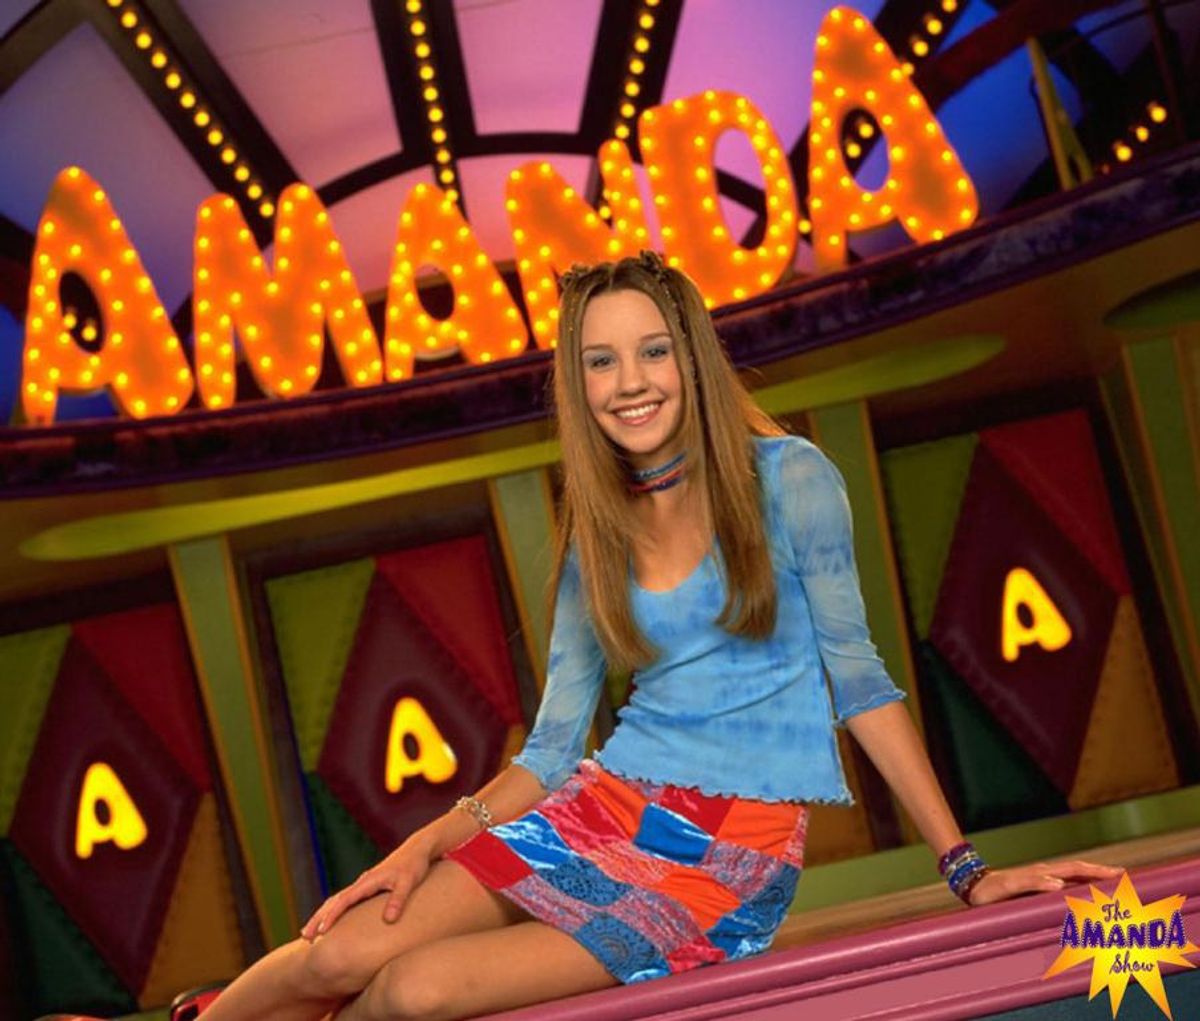 15 Things We Learned From The Amanda Show